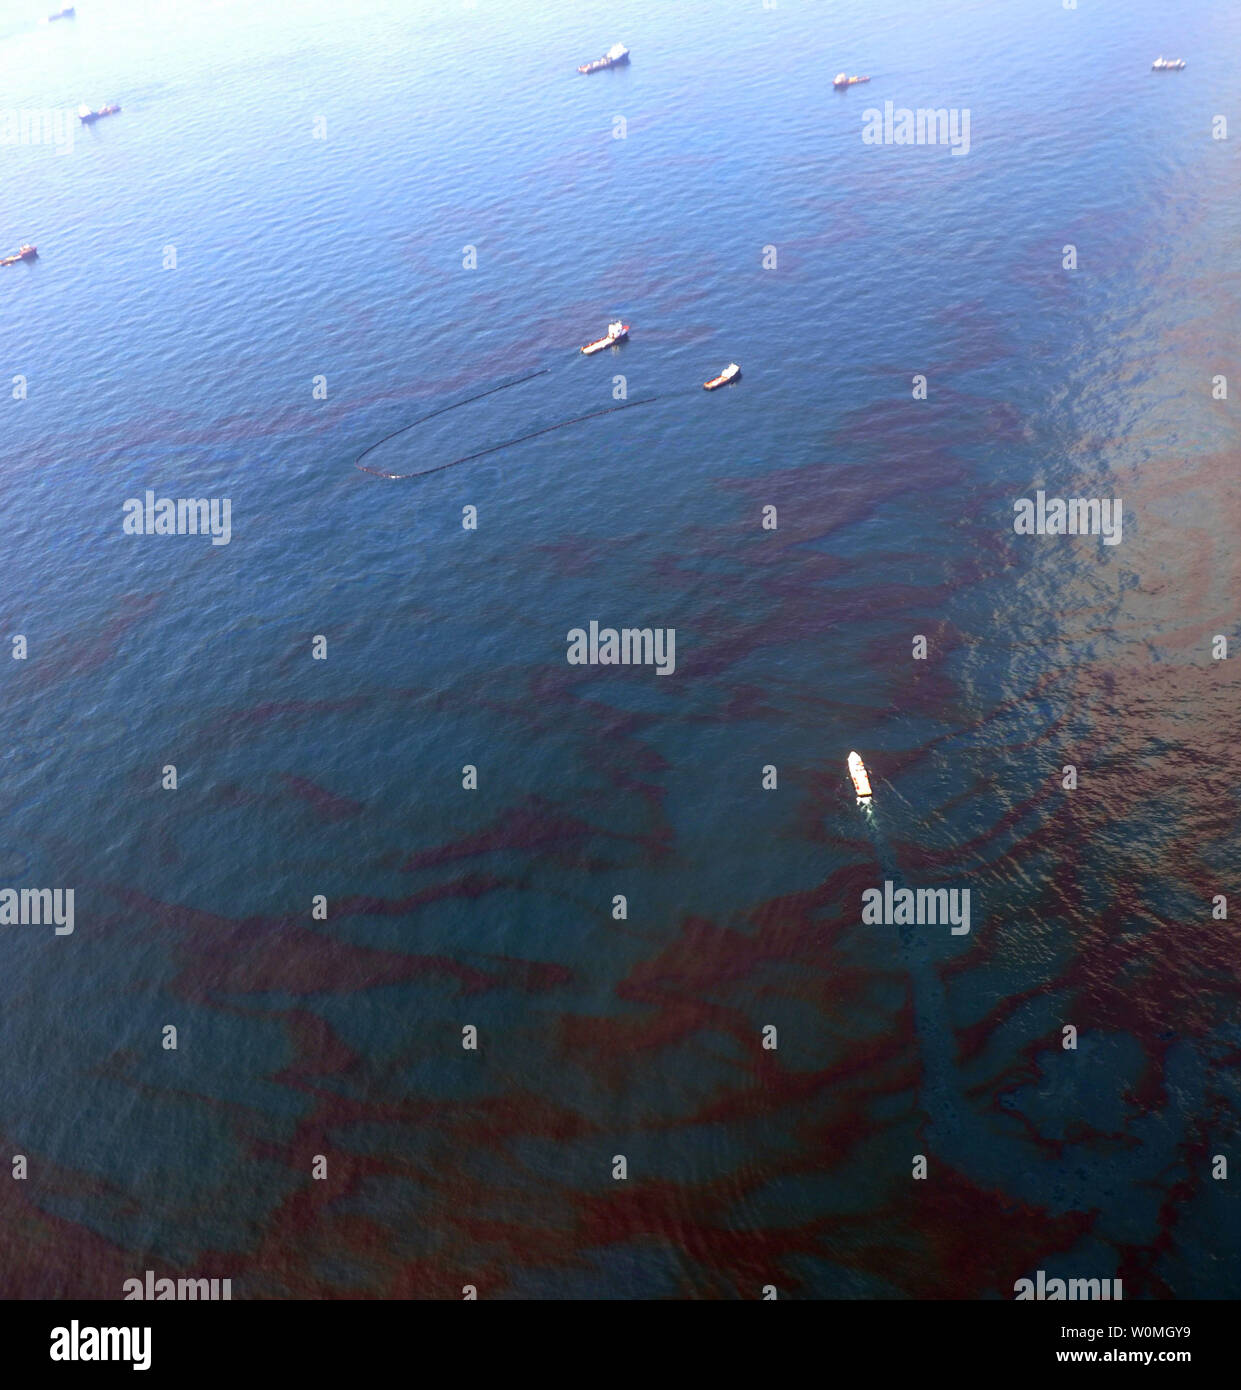 Crude oil is seen on the surface of the water in the Gulf of Mexico near Biloxi, Mississippi on June 12, 2010, as it continues to leak from the British Petroleum underwater well after the Deepwater Horizon oil rig explosion. UPI/Casey Ware/U.S. Coast Guard Stock Photo